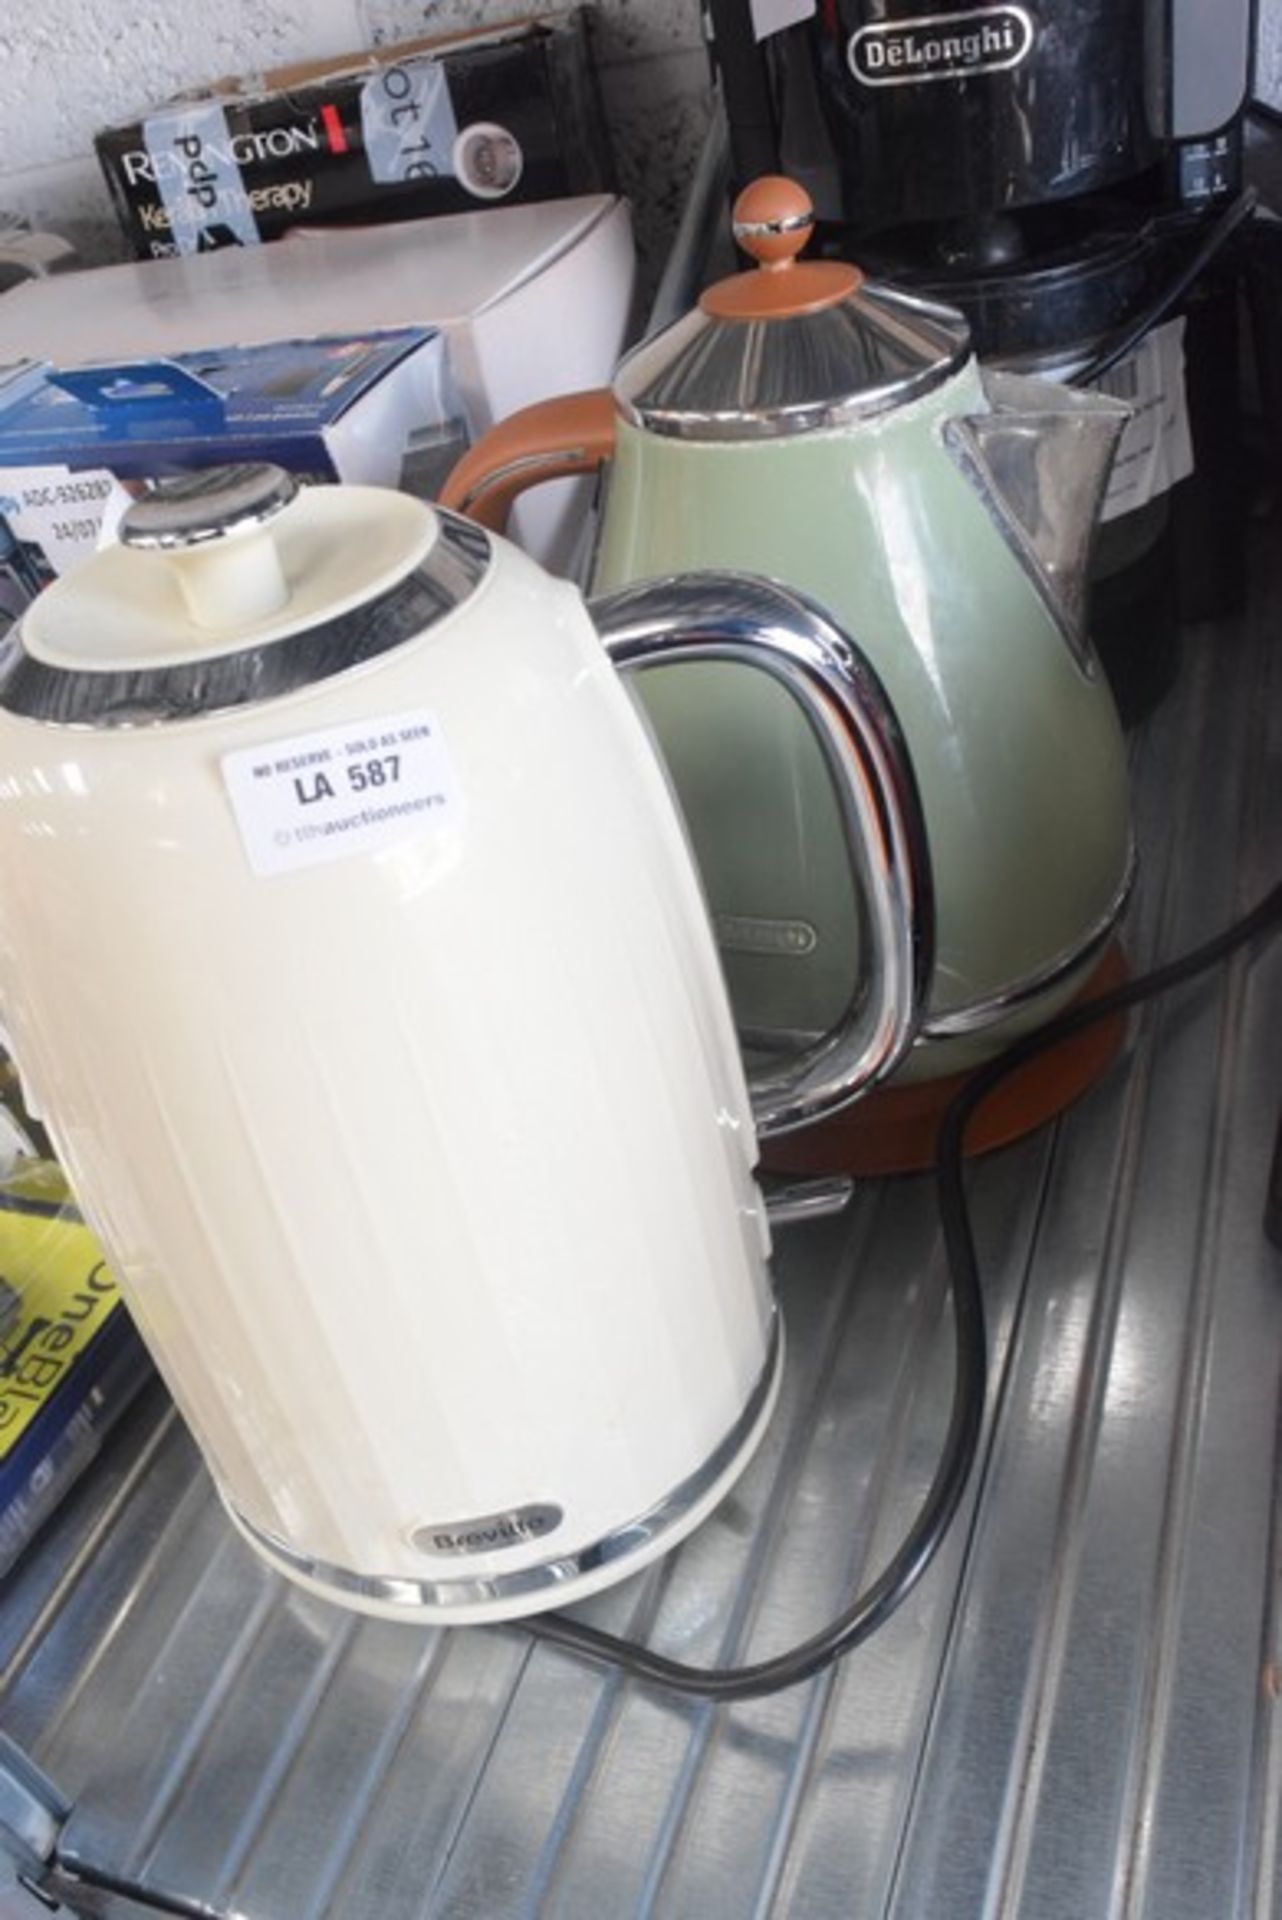 1 x BREVILLE IMPRESSION 1.7L JUG KETTLE RRP £40 24/07/17 *PLEASE NOTE THAT THE BID PRICE IS